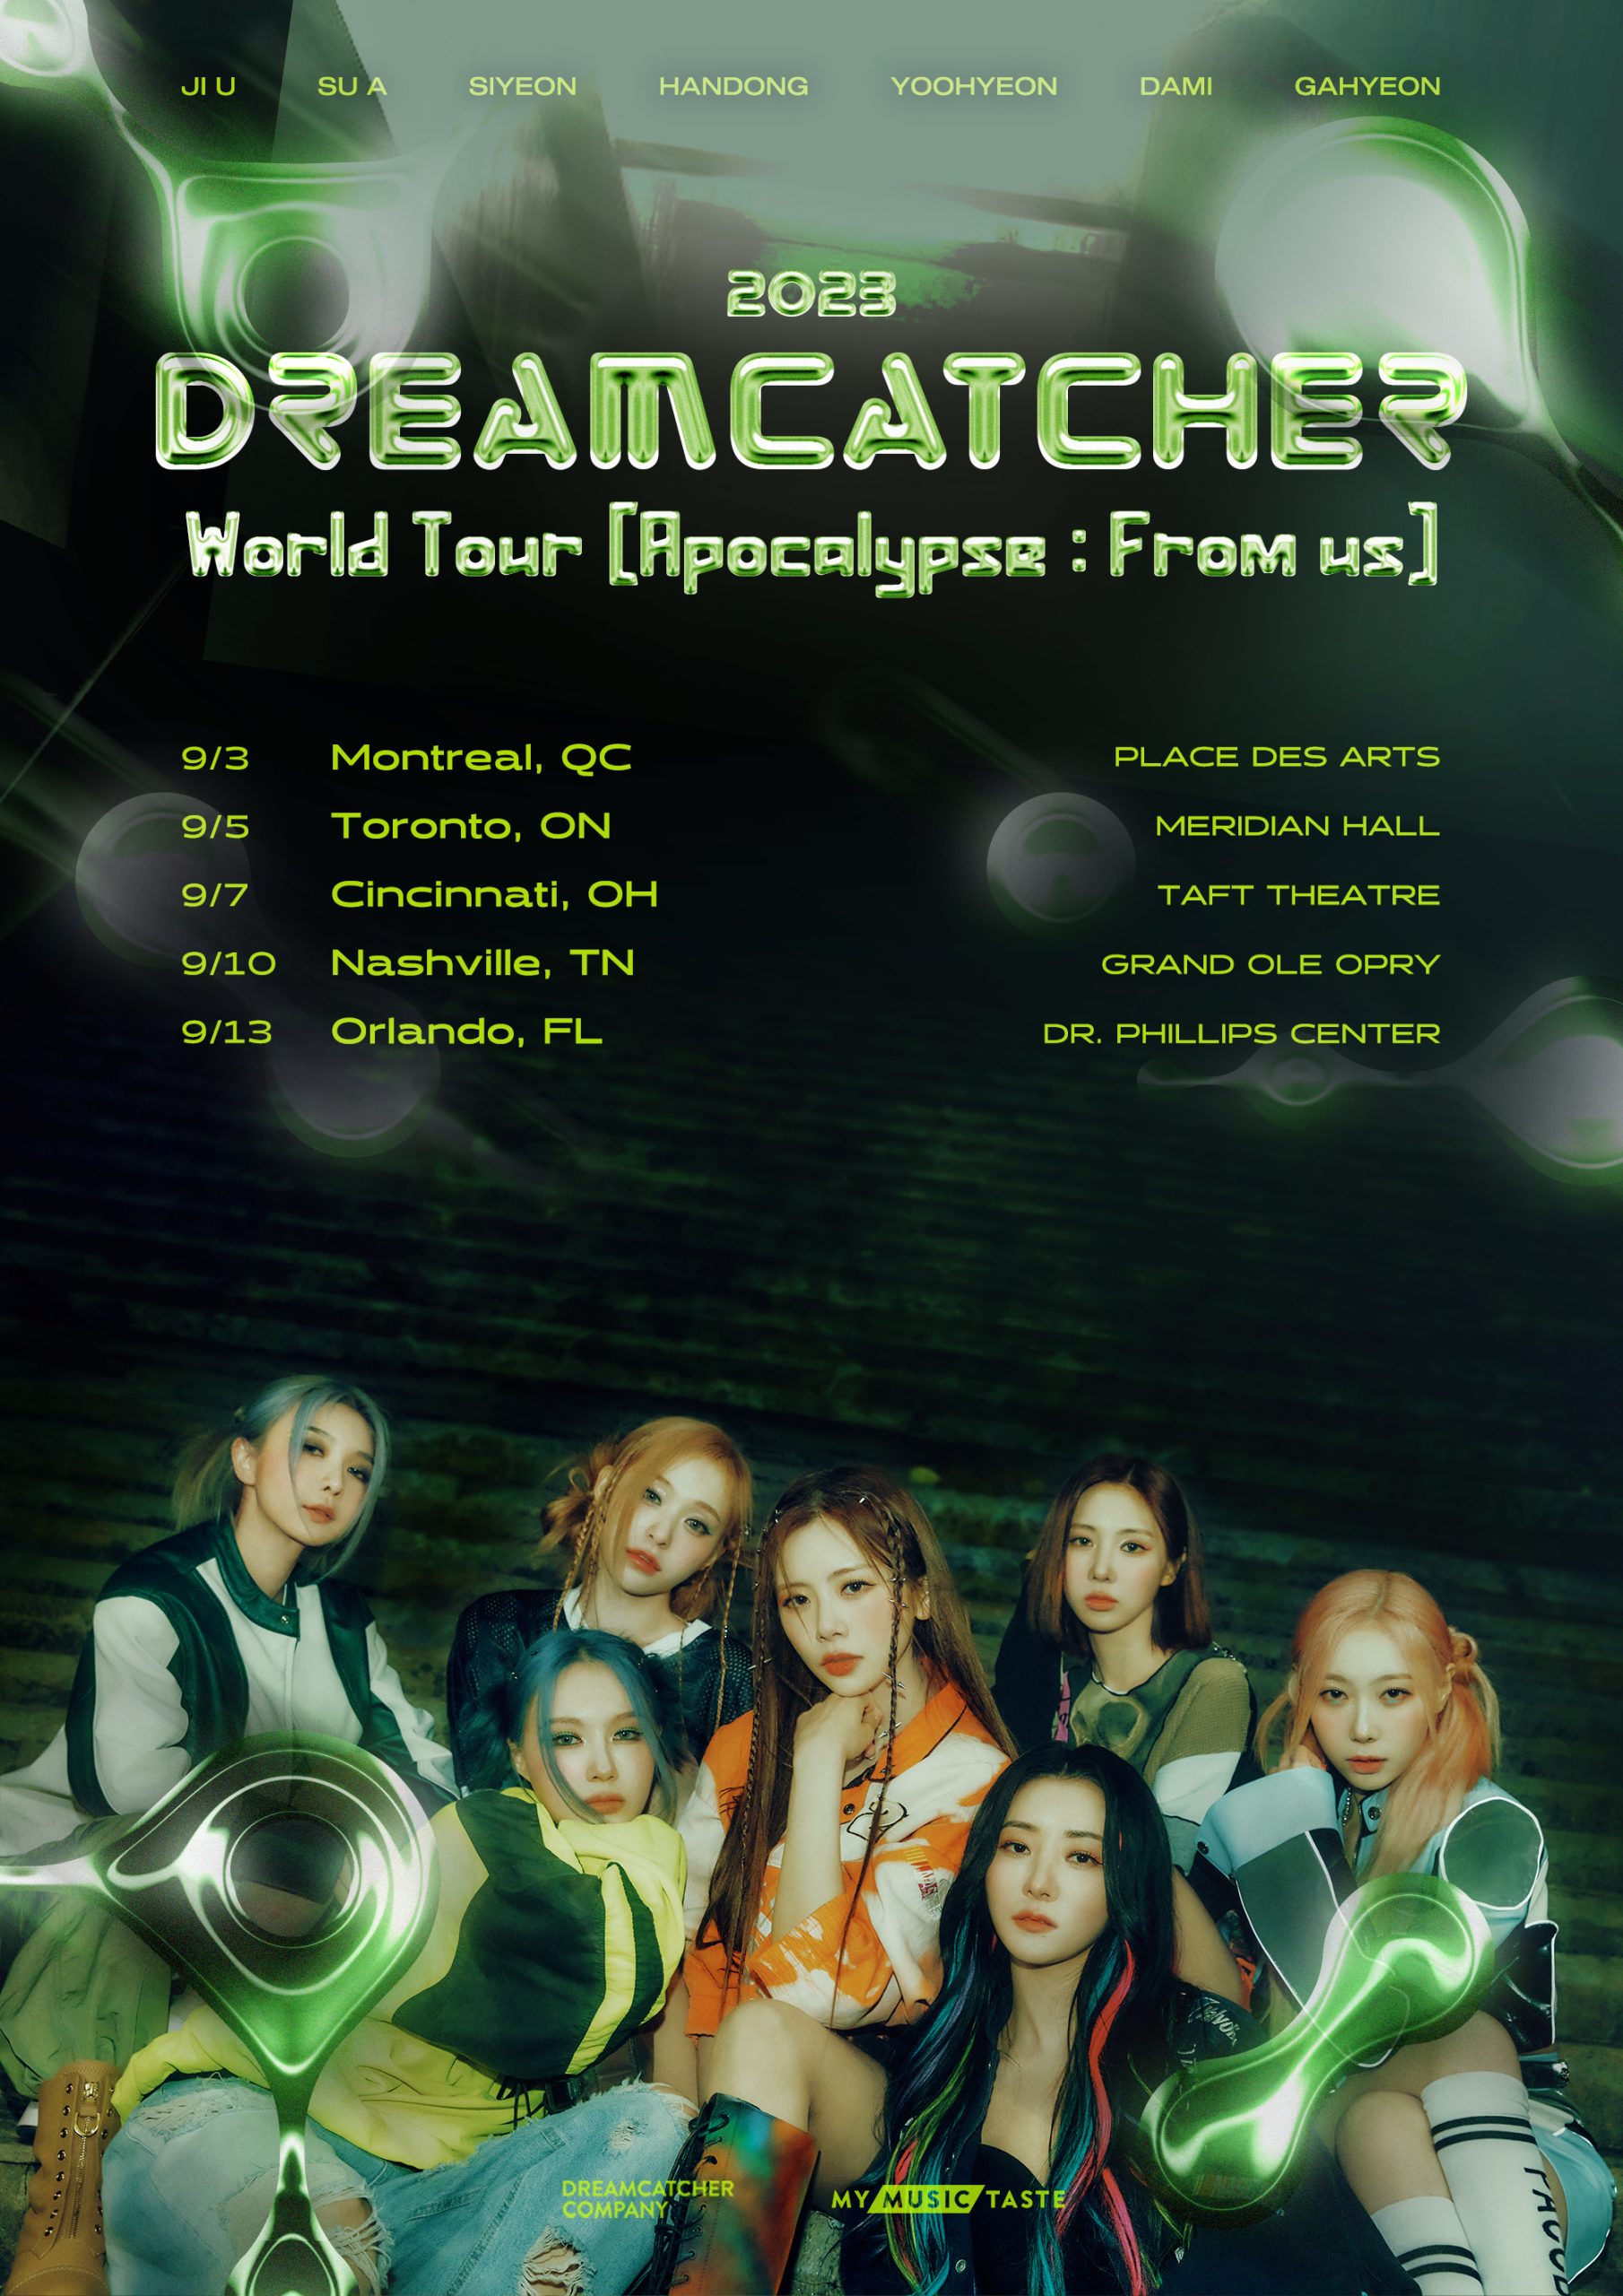 DREAMCATCHER READY TO CAPTIVATE FANS WITH THEIR WORLD TOUR